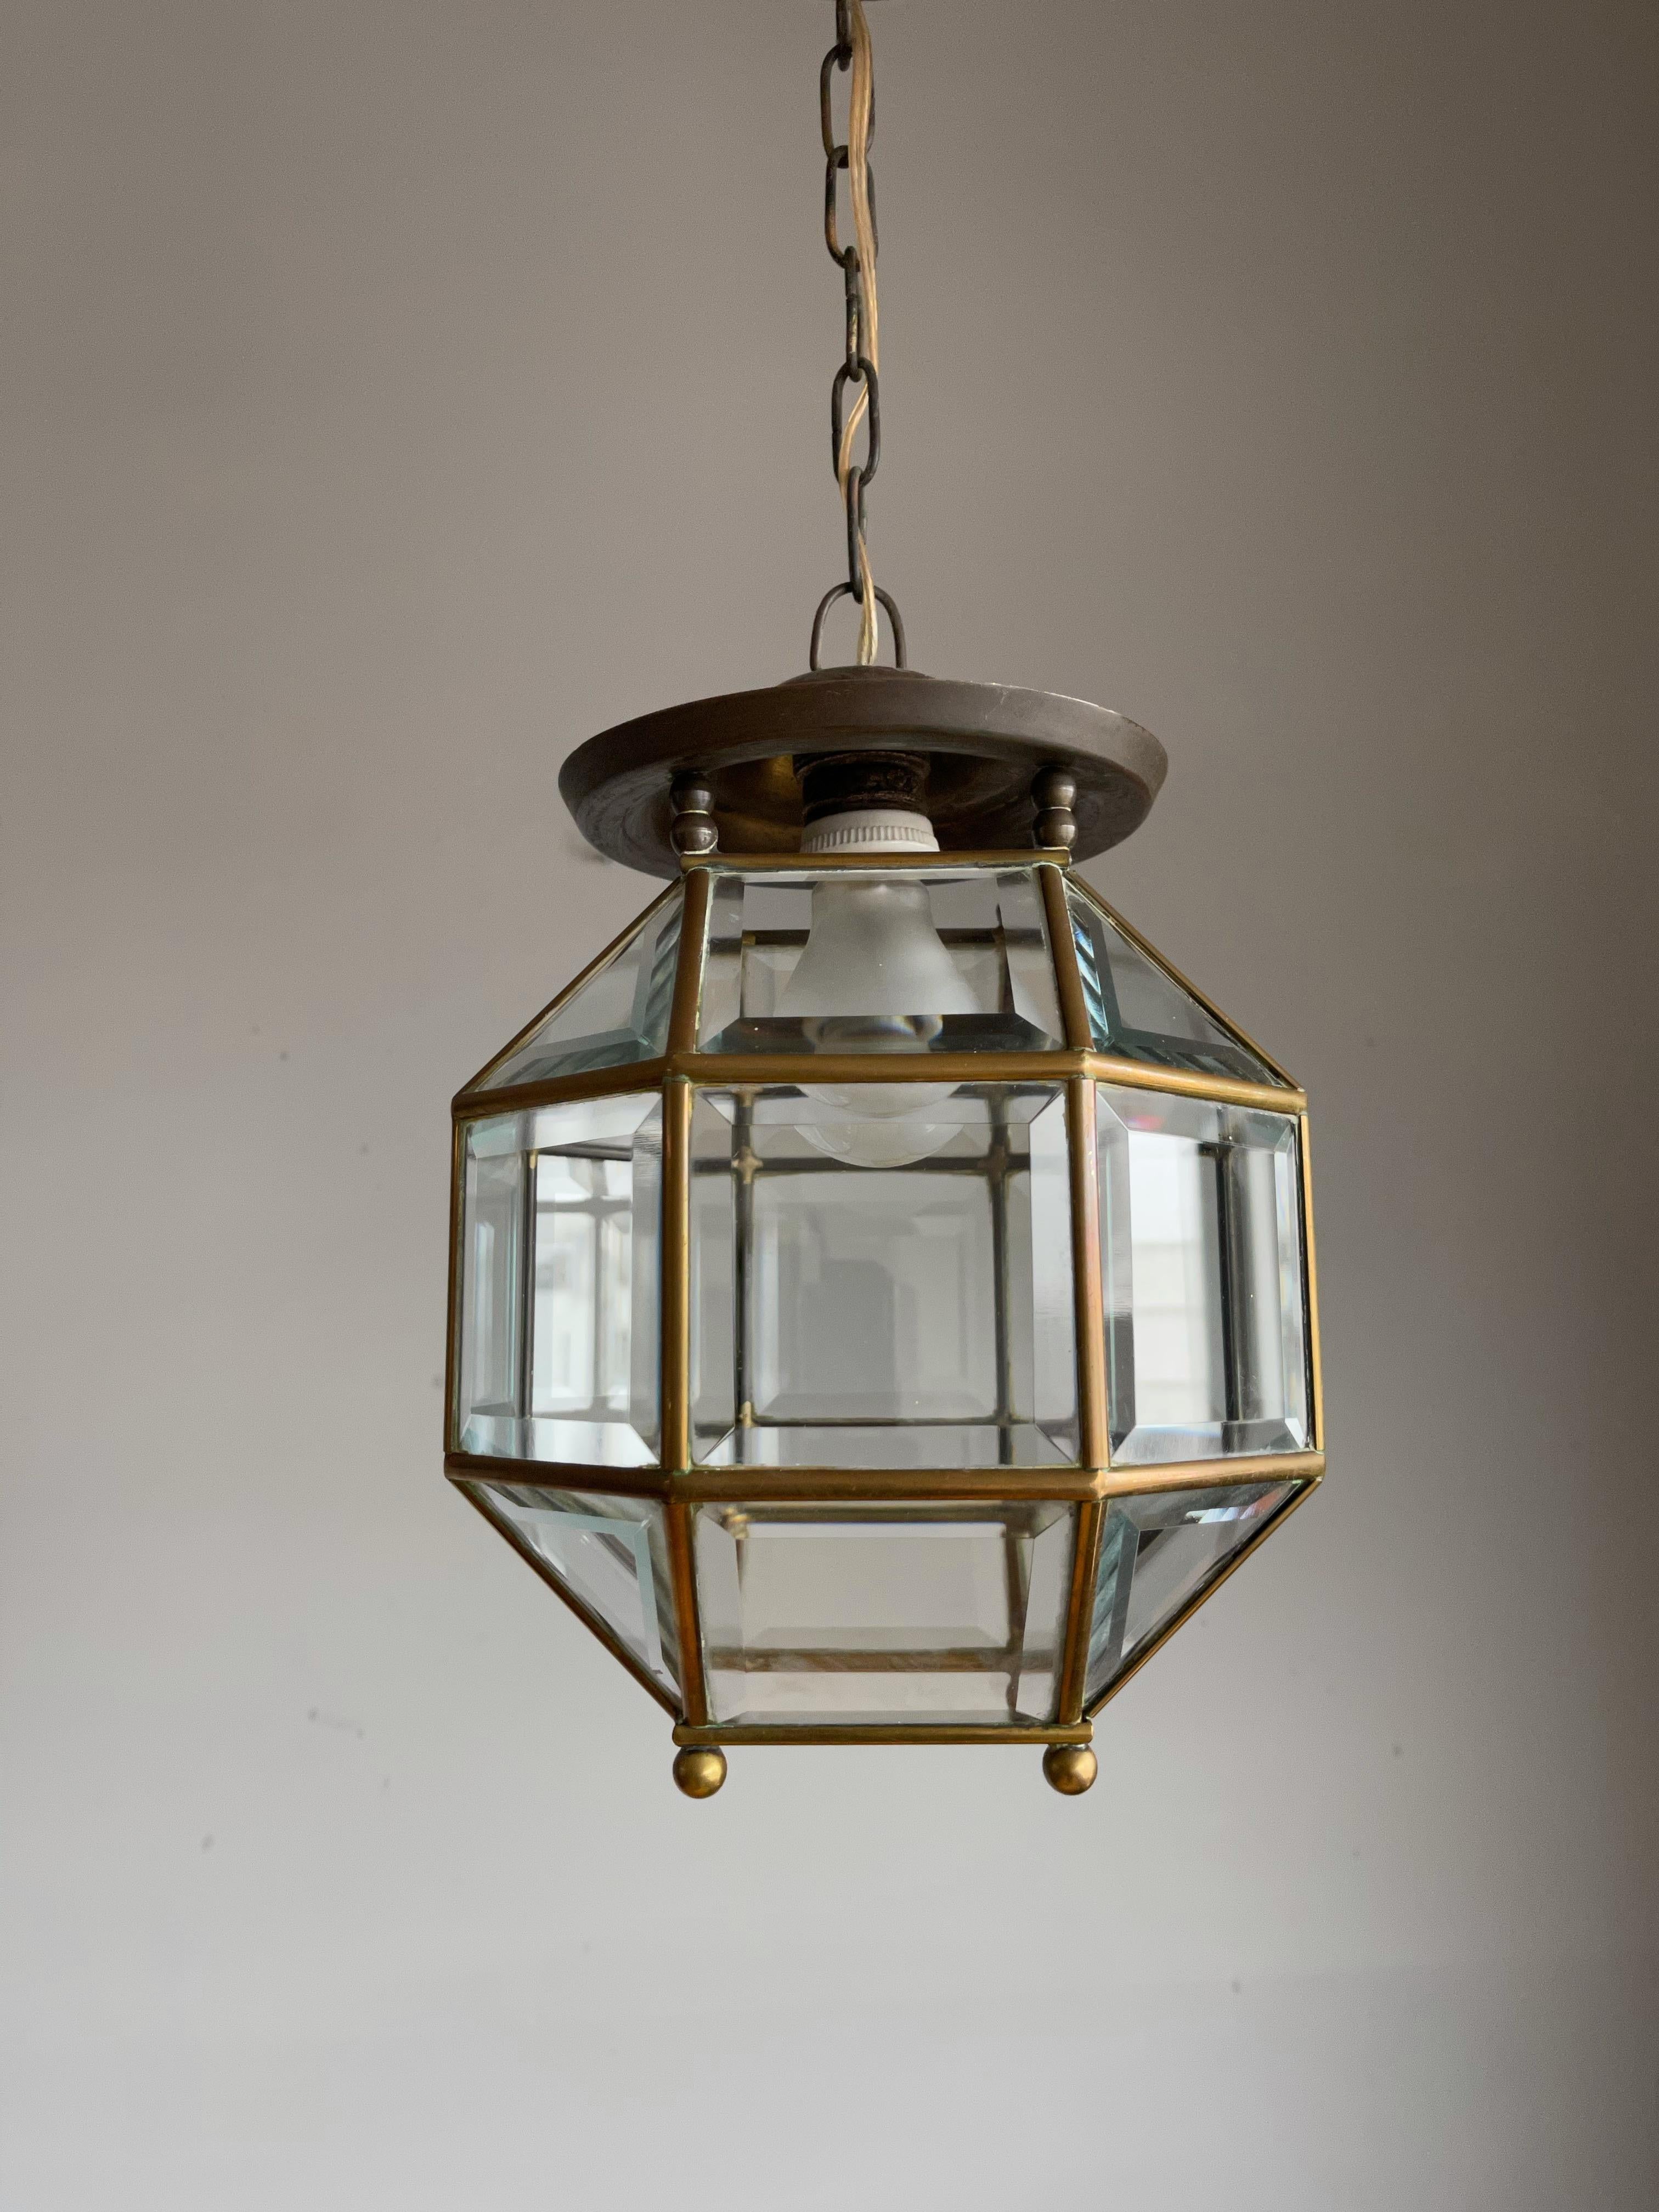 Early 1900s Beveled Glass and Brass Pendant Cubic Adolf Loos Style Ceiling Light 1